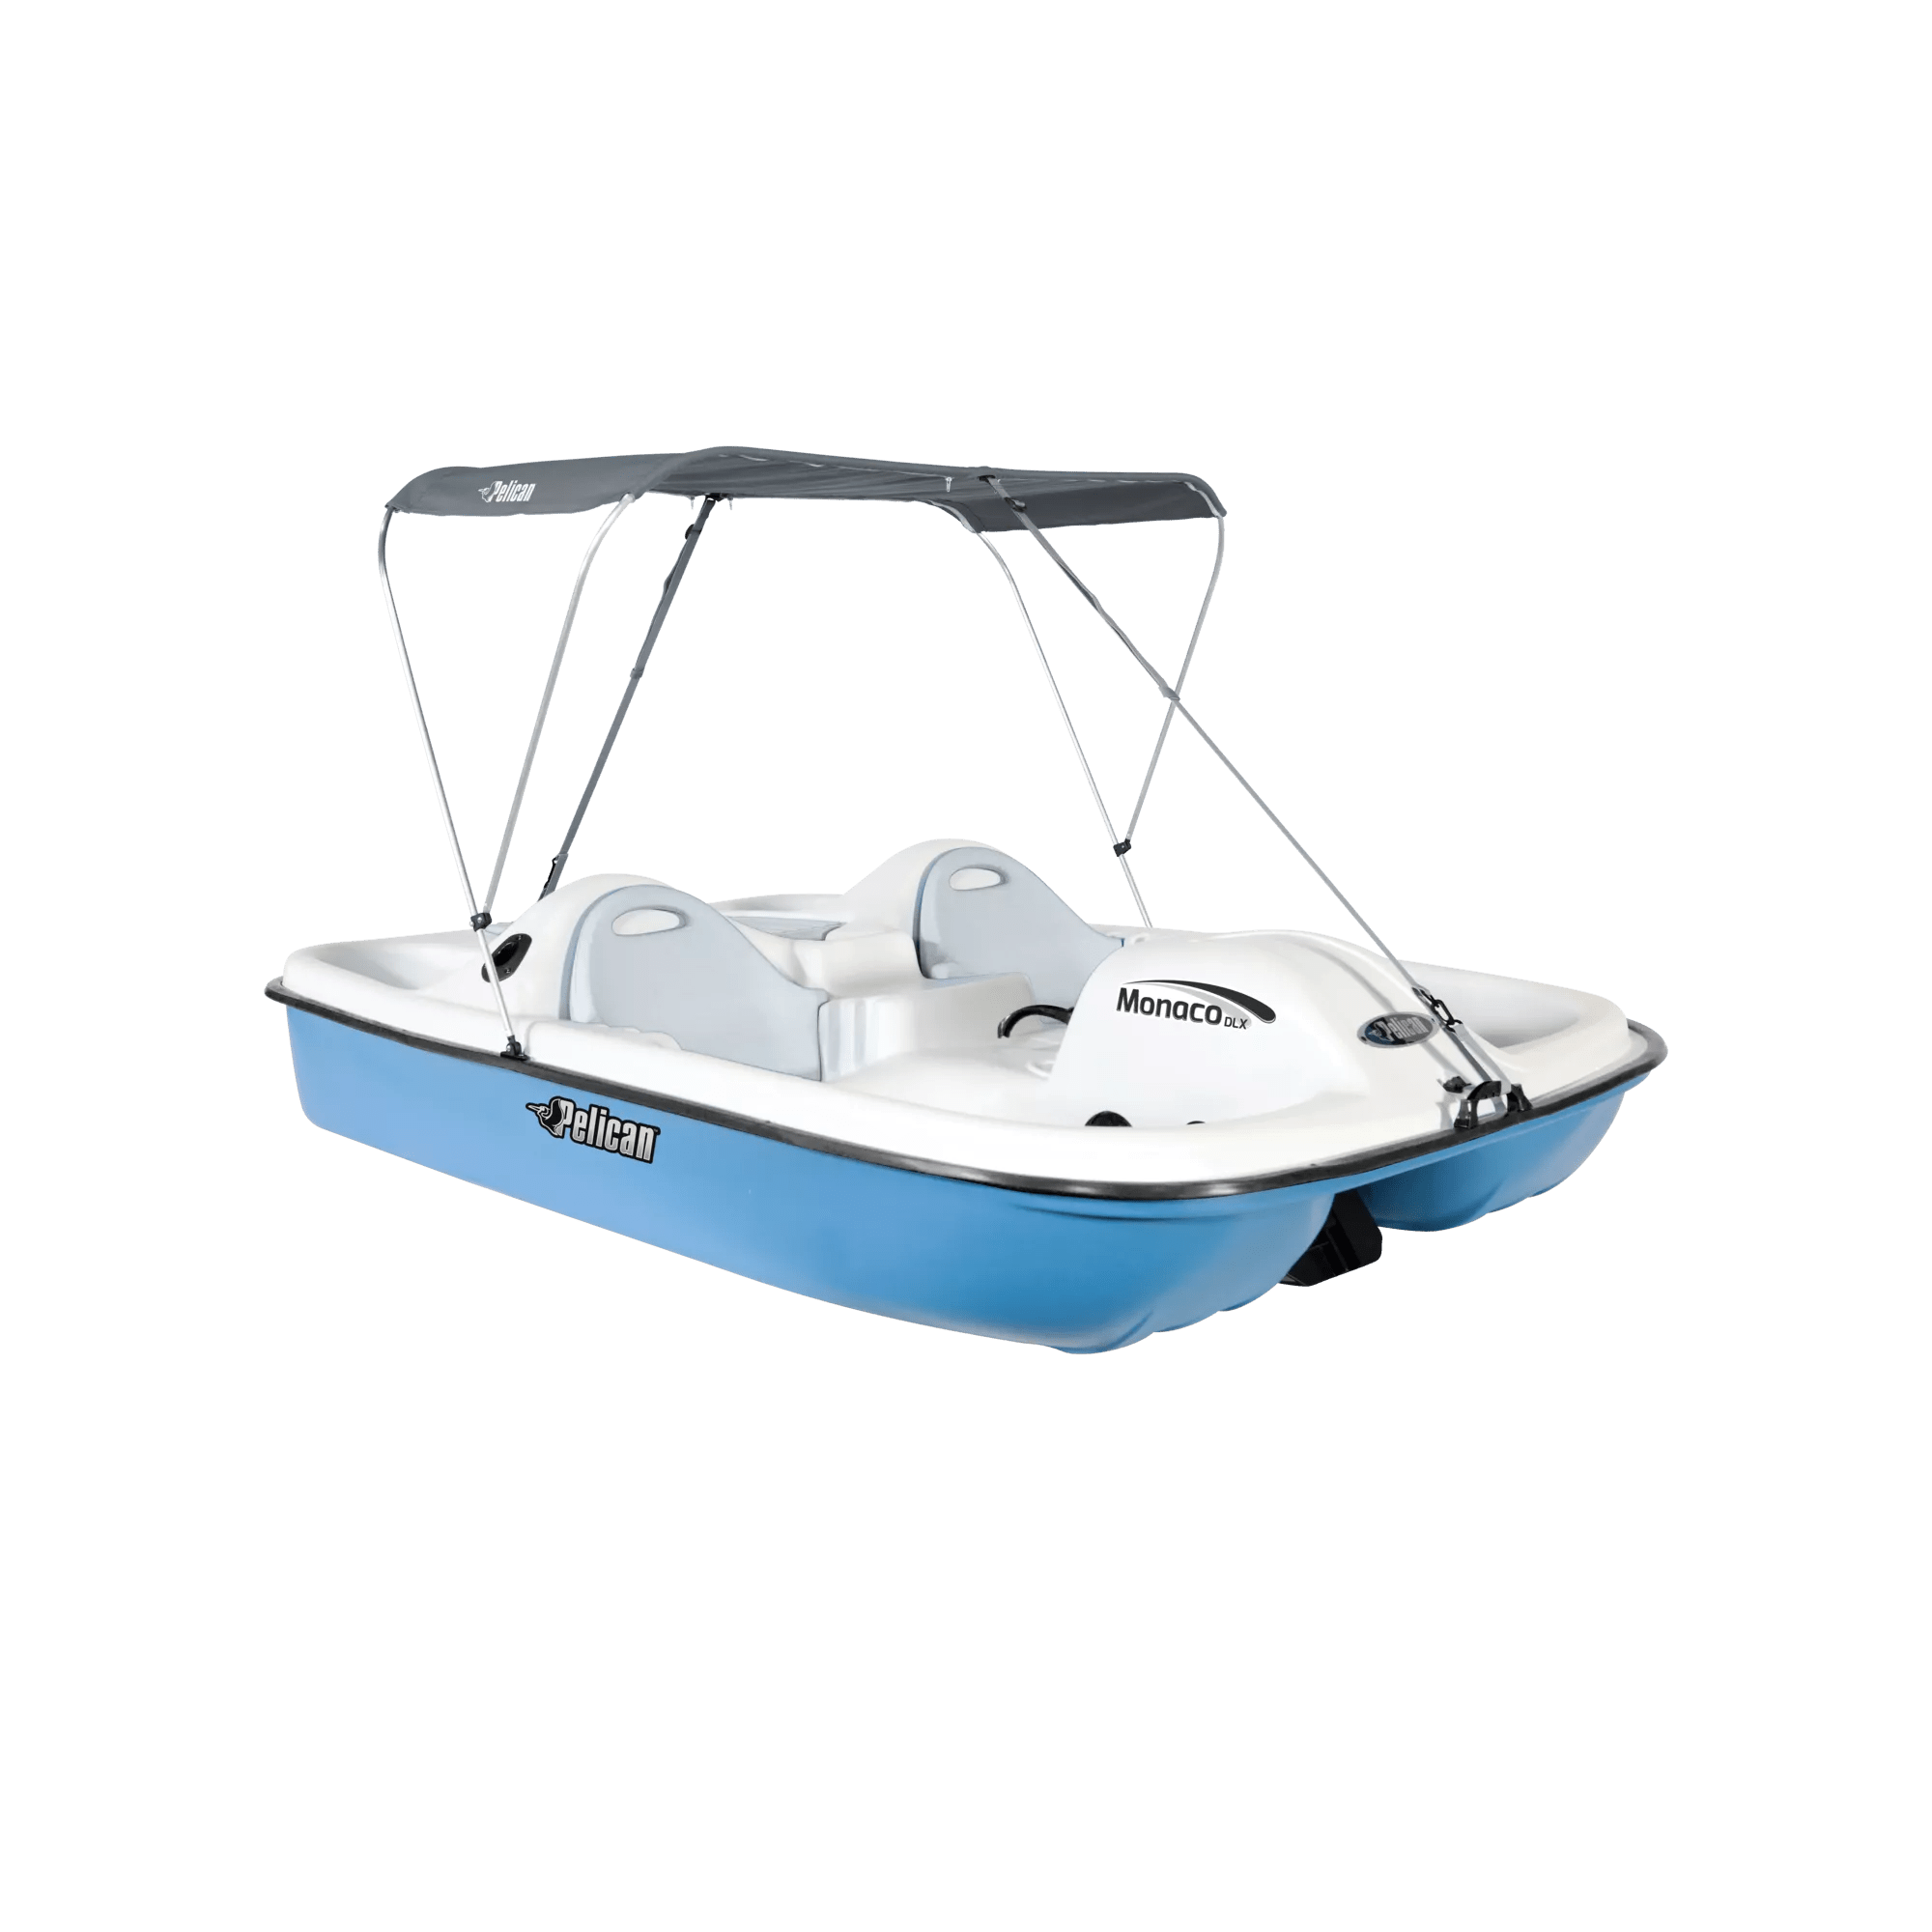 PELICAN - Monaco DLX Pedal Boat with Canopy - Blue - HHA25P109 - ISO